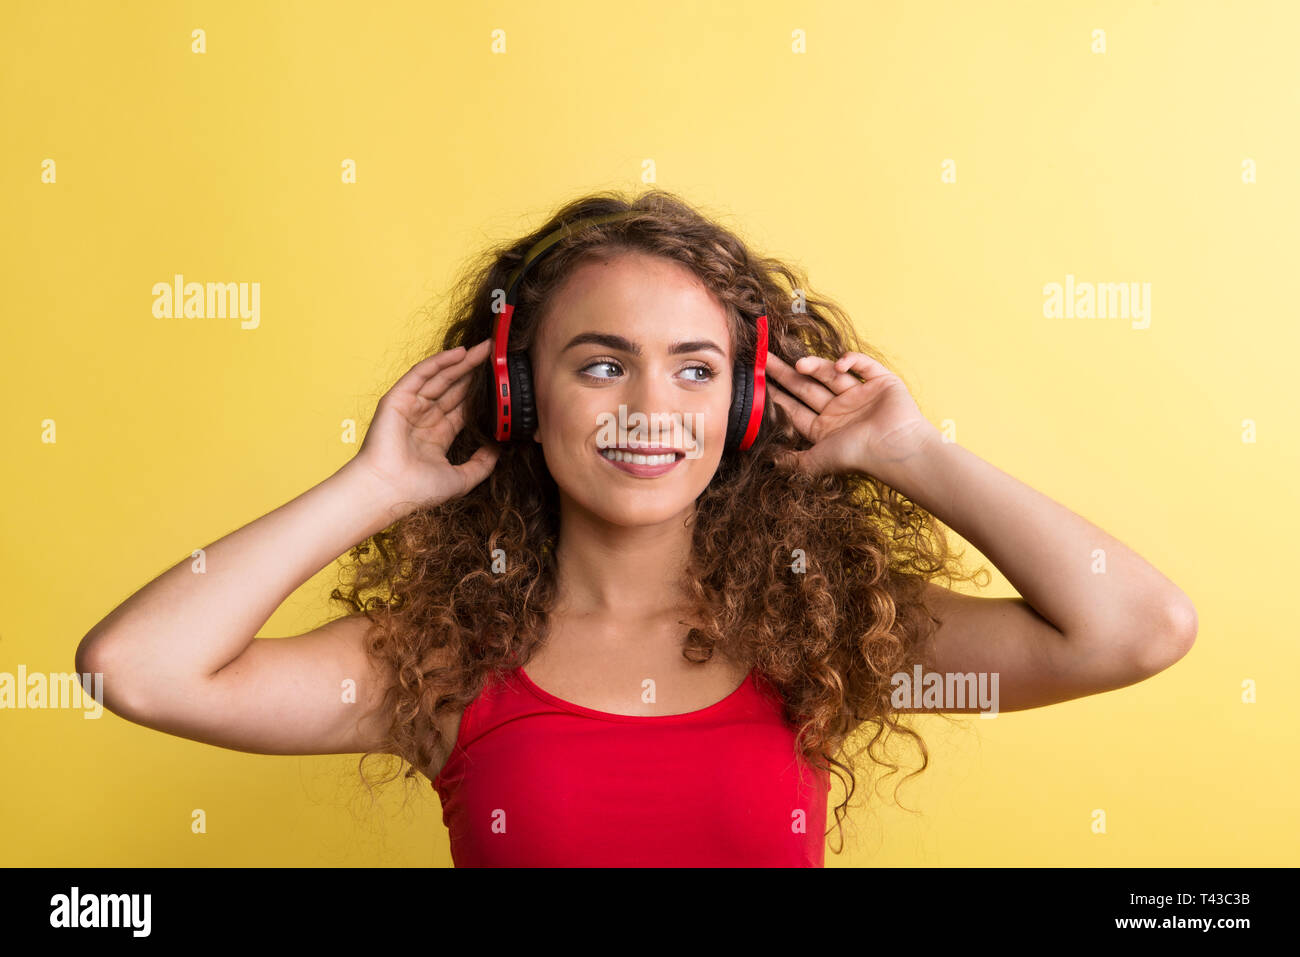 Portrait of a young woman with headphones in a studio on a yellow background. Stock Photo